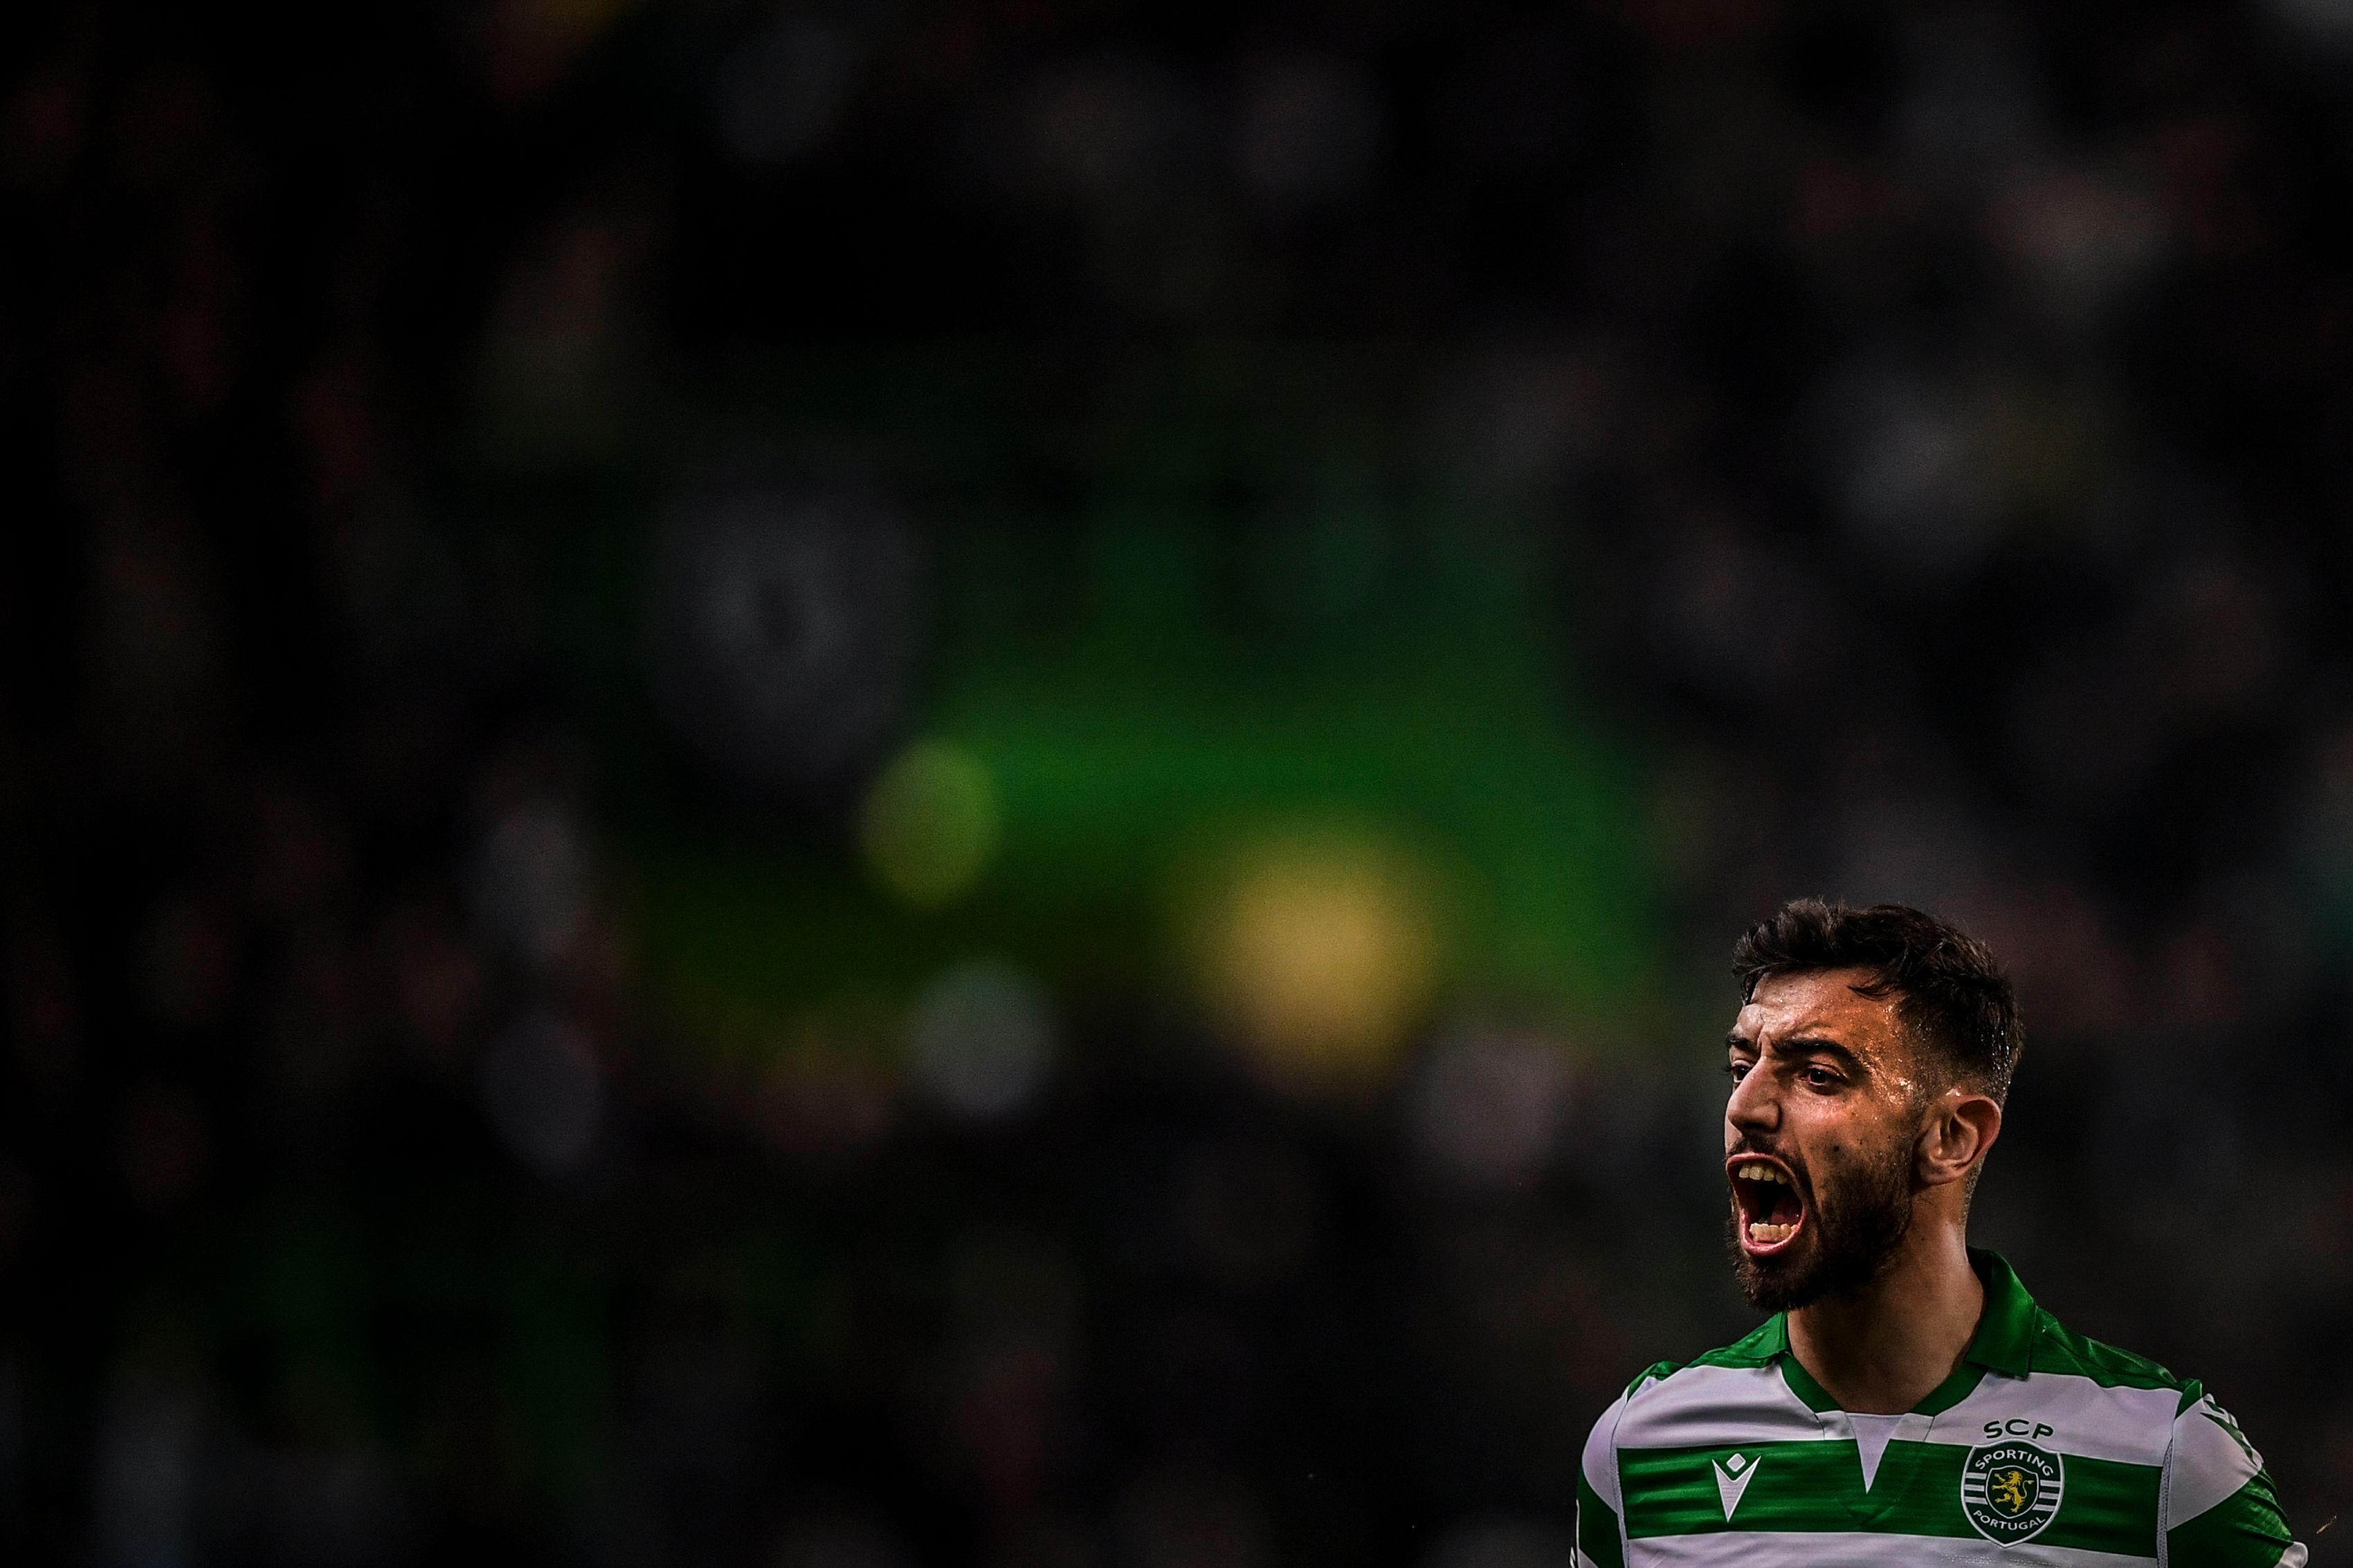 Sporting's Portuguese midfielder Bruno Fernandes shouts during the Portuguese league football match between Sporting CP and FC Porto at the Jose Alvalade stadium in Lisbon on January 5, 2020. (Photo by PATRICIA DE MELO MOREIRA / AFP) (Photo by PATRICIA DE MELO MOREIRA/AFP via Getty Images)